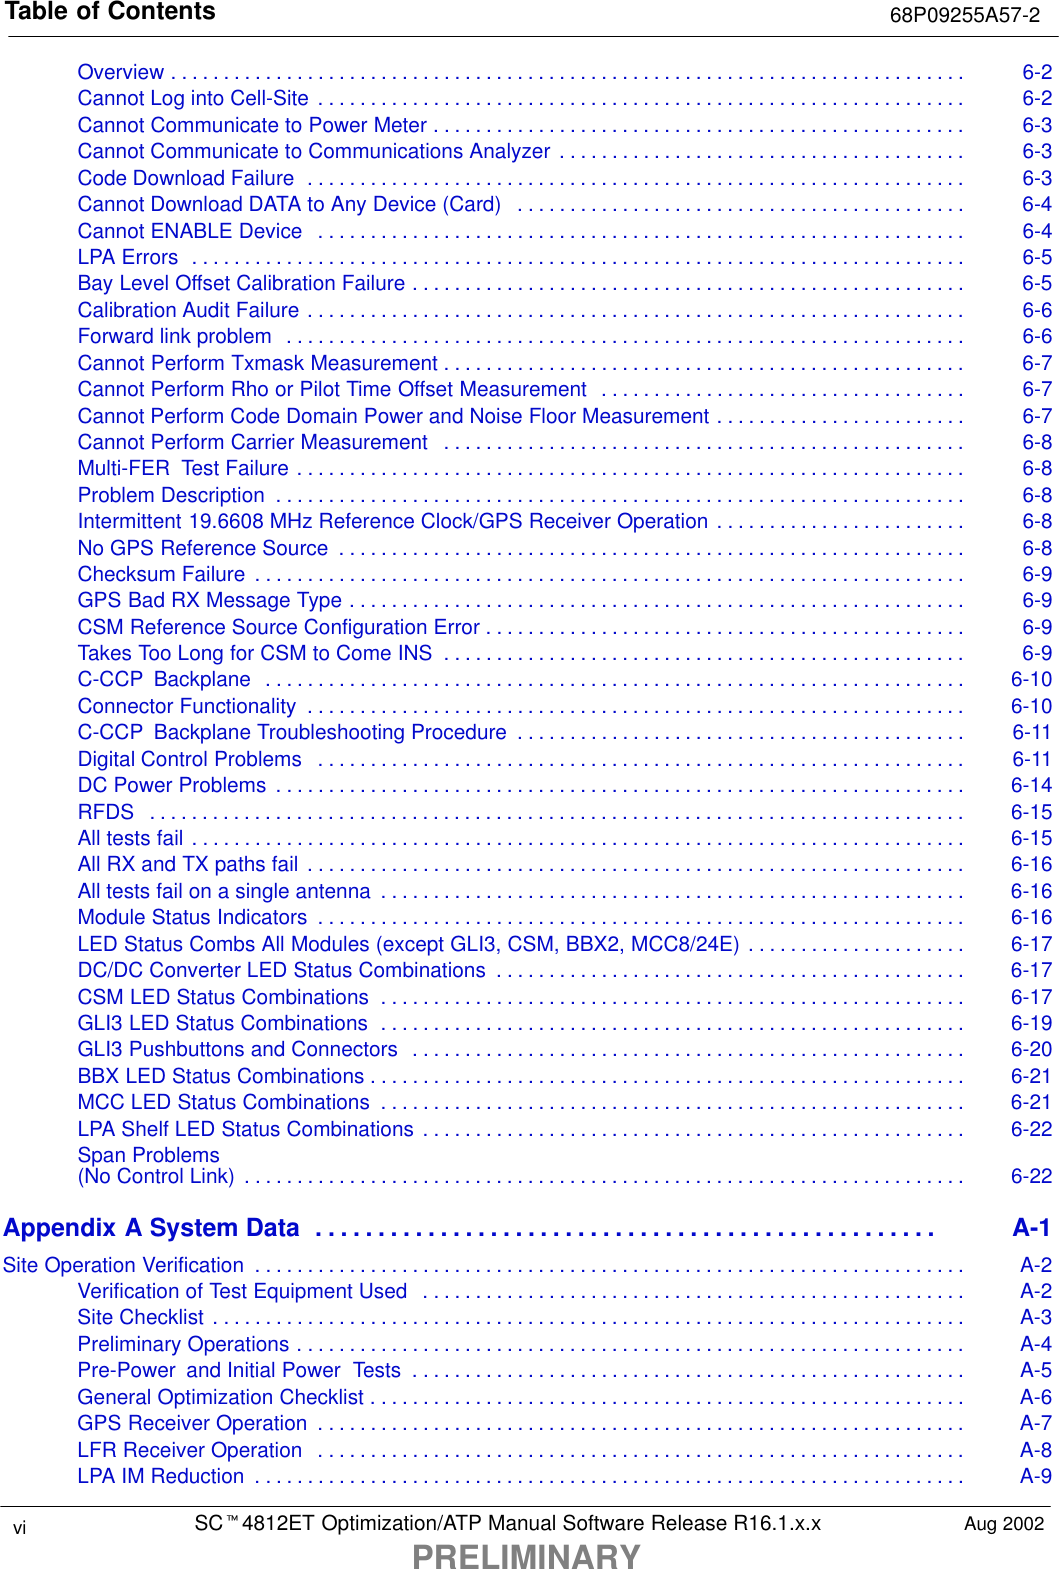 Table of Contents 68P09255A57-2SCt4812ET Optimization/ATP Manual Software Release R16.1.x.xPRELIMINARYvi Aug 2002Overview 6-2. . . . . . . . . . . . . . . . . . . . . . . . . . . . . . . . . . . . . . . . . . . . . . . . . . . . . . . . . . . . . . . . . . . . . . . . . . . . Cannot Log into Cell-Site 6-2. . . . . . . . . . . . . . . . . . . . . . . . . . . . . . . . . . . . . . . . . . . . . . . . . . . . . . . . . . . . . . Cannot Communicate to Power Meter 6-3. . . . . . . . . . . . . . . . . . . . . . . . . . . . . . . . . . . . . . . . . . . . . . . . . . . Cannot Communicate to Communications Analyzer 6-3. . . . . . . . . . . . . . . . . . . . . . . . . . . . . . . . . . . . . . . Code Download Failure 6-3. . . . . . . . . . . . . . . . . . . . . . . . . . . . . . . . . . . . . . . . . . . . . . . . . . . . . . . . . . . . . . . Cannot Download DATA to Any Device (Card) 6-4. . . . . . . . . . . . . . . . . . . . . . . . . . . . . . . . . . . . . . . . . . . Cannot ENABLE Device 6-4. . . . . . . . . . . . . . . . . . . . . . . . . . . . . . . . . . . . . . . . . . . . . . . . . . . . . . . . . . . . . . LPA Errors 6-5. . . . . . . . . . . . . . . . . . . . . . . . . . . . . . . . . . . . . . . . . . . . . . . . . . . . . . . . . . . . . . . . . . . . . . . . . . Bay Level Offset Calibration Failure 6-5. . . . . . . . . . . . . . . . . . . . . . . . . . . . . . . . . . . . . . . . . . . . . . . . . . . . . Calibration Audit Failure 6-6. . . . . . . . . . . . . . . . . . . . . . . . . . . . . . . . . . . . . . . . . . . . . . . . . . . . . . . . . . . . . . . Forward link problem 6-6. . . . . . . . . . . . . . . . . . . . . . . . . . . . . . . . . . . . . . . . . . . . . . . . . . . . . . . . . . . . . . . . . Cannot Perform Txmask Measurement 6-7. . . . . . . . . . . . . . . . . . . . . . . . . . . . . . . . . . . . . . . . . . . . . . . . . . Cannot Perform Rho or Pilot Time Offset Measurement 6-7. . . . . . . . . . . . . . . . . . . . . . . . . . . . . . . . . . . Cannot Perform Code Domain Power and Noise Floor Measurement 6-7. . . . . . . . . . . . . . . . . . . . . . . . Cannot Perform Carrier Measurement 6-8. . . . . . . . . . . . . . . . . . . . . . . . . . . . . . . . . . . . . . . . . . . . . . . . . . Multi-FER  Test Failure 6-8. . . . . . . . . . . . . . . . . . . . . . . . . . . . . . . . . . . . . . . . . . . . . . . . . . . . . . . . . . . . . . . . Problem Description 6-8. . . . . . . . . . . . . . . . . . . . . . . . . . . . . . . . . . . . . . . . . . . . . . . . . . . . . . . . . . . . . . . . . . Intermittent 19.6608 MHz Reference Clock/GPS Receiver Operation 6-8. . . . . . . . . . . . . . . . . . . . . . . . No GPS Reference Source 6-8. . . . . . . . . . . . . . . . . . . . . . . . . . . . . . . . . . . . . . . . . . . . . . . . . . . . . . . . . . . . Checksum Failure 6-9. . . . . . . . . . . . . . . . . . . . . . . . . . . . . . . . . . . . . . . . . . . . . . . . . . . . . . . . . . . . . . . . . . . . GPS Bad RX Message Type 6-9. . . . . . . . . . . . . . . . . . . . . . . . . . . . . . . . . . . . . . . . . . . . . . . . . . . . . . . . . . . CSM Reference Source Configuration Error 6-9. . . . . . . . . . . . . . . . . . . . . . . . . . . . . . . . . . . . . . . . . . . . . . Takes Too Long for CSM to Come INS 6-9. . . . . . . . . . . . . . . . . . . . . . . . . . . . . . . . . . . . . . . . . . . . . . . . . . C-CCP  Backplane 6-10. . . . . . . . . . . . . . . . . . . . . . . . . . . . . . . . . . . . . . . . . . . . . . . . . . . . . . . . . . . . . . . . . . . Connector Functionality 6-10. . . . . . . . . . . . . . . . . . . . . . . . . . . . . . . . . . . . . . . . . . . . . . . . . . . . . . . . . . . . . . . C-CCP  Backplane Troubleshooting Procedure 6-11. . . . . . . . . . . . . . . . . . . . . . . . . . . . . . . . . . . . . . . . . . . Digital Control Problems 6-11. . . . . . . . . . . . . . . . . . . . . . . . . . . . . . . . . . . . . . . . . . . . . . . . . . . . . . . . . . . . . . DC Power Problems 6-14. . . . . . . . . . . . . . . . . . . . . . . . . . . . . . . . . . . . . . . . . . . . . . . . . . . . . . . . . . . . . . . . . . RFDS 6-15. . . . . . . . . . . . . . . . . . . . . . . . . . . . . . . . . . . . . . . . . . . . . . . . . . . . . . . . . . . . . . . . . . . . . . . . . . . . . . All tests fail 6-15. . . . . . . . . . . . . . . . . . . . . . . . . . . . . . . . . . . . . . . . . . . . . . . . . . . . . . . . . . . . . . . . . . . . . . . . . . All RX and TX paths fail 6-16. . . . . . . . . . . . . . . . . . . . . . . . . . . . . . . . . . . . . . . . . . . . . . . . . . . . . . . . . . . . . . . All tests fail on a single antenna 6-16. . . . . . . . . . . . . . . . . . . . . . . . . . . . . . . . . . . . . . . . . . . . . . . . . . . . . . . . Module Status Indicators 6-16. . . . . . . . . . . . . . . . . . . . . . . . . . . . . . . . . . . . . . . . . . . . . . . . . . . . . . . . . . . . . . LED Status Combs All Modules (except GLI3, CSM, BBX2, MCC8/24E) 6-17. . . . . . . . . . . . . . . . . . . . . DC/DC Converter LED Status Combinations 6-17. . . . . . . . . . . . . . . . . . . . . . . . . . . . . . . . . . . . . . . . . . . . . CSM LED Status Combinations 6-17. . . . . . . . . . . . . . . . . . . . . . . . . . . . . . . . . . . . . . . . . . . . . . . . . . . . . . . . GLI3 LED Status Combinations 6-19. . . . . . . . . . . . . . . . . . . . . . . . . . . . . . . . . . . . . . . . . . . . . . . . . . . . . . . . GLI3 Pushbuttons and Connectors 6-20. . . . . . . . . . . . . . . . . . . . . . . . . . . . . . . . . . . . . . . . . . . . . . . . . . . . . BBX LED Status Combinations 6-21. . . . . . . . . . . . . . . . . . . . . . . . . . . . . . . . . . . . . . . . . . . . . . . . . . . . . . . . . MCC LED Status Combinations 6-21. . . . . . . . . . . . . . . . . . . . . . . . . . . . . . . . . . . . . . . . . . . . . . . . . . . . . . . . LPA Shelf LED Status Combinations 6-22. . . . . . . . . . . . . . . . . . . . . . . . . . . . . . . . . . . . . . . . . . . . . . . . . . . . Span Problems(No Control Link) 6-22. . . . . . . . . . . . . . . . . . . . . . . . . . . . . . . . . . . . . . . . . . . . . . . . . . . . . . . . . . . . . . . . . . . . . Appendix A System Data A-1. . . . . . . . . . . . . . . . . . . . . . . . . . . . . . . . . . . . . . . . . . . . . . . . . . Site Operation Verification A-2. . . . . . . . . . . . . . . . . . . . . . . . . . . . . . . . . . . . . . . . . . . . . . . . . . . . . . . . . . . . . . . . . . . . Verification of Test Equipment Used A-2. . . . . . . . . . . . . . . . . . . . . . . . . . . . . . . . . . . . . . . . . . . . . . . . . . . . Site Checklist A-3. . . . . . . . . . . . . . . . . . . . . . . . . . . . . . . . . . . . . . . . . . . . . . . . . . . . . . . . . . . . . . . . . . . . . . . . Preliminary Operations A-4. . . . . . . . . . . . . . . . . . . . . . . . . . . . . . . . . . . . . . . . . . . . . . . . . . . . . . . . . . . . . . . . Pre-Power  and Initial Power  Tests A-5. . . . . . . . . . . . . . . . . . . . . . . . . . . . . . . . . . . . . . . . . . . . . . . . . . . . . General Optimization Checklist A-6. . . . . . . . . . . . . . . . . . . . . . . . . . . . . . . . . . . . . . . . . . . . . . . . . . . . . . . . . GPS Receiver Operation A-7. . . . . . . . . . . . . . . . . . . . . . . . . . . . . . . . . . . . . . . . . . . . . . . . . . . . . . . . . . . . . . LFR Receiver Operation A-8. . . . . . . . . . . . . . . . . . . . . . . . . . . . . . . . . . . . . . . . . . . . . . . . . . . . . . . . . . . . . . LPA IM Reduction A-9. . . . . . . . . . . . . . . . . . . . . . . . . . . . . . . . . . . . . . . . . . . . . . . . . . . . . . . . . . . . . . . . . . . . 